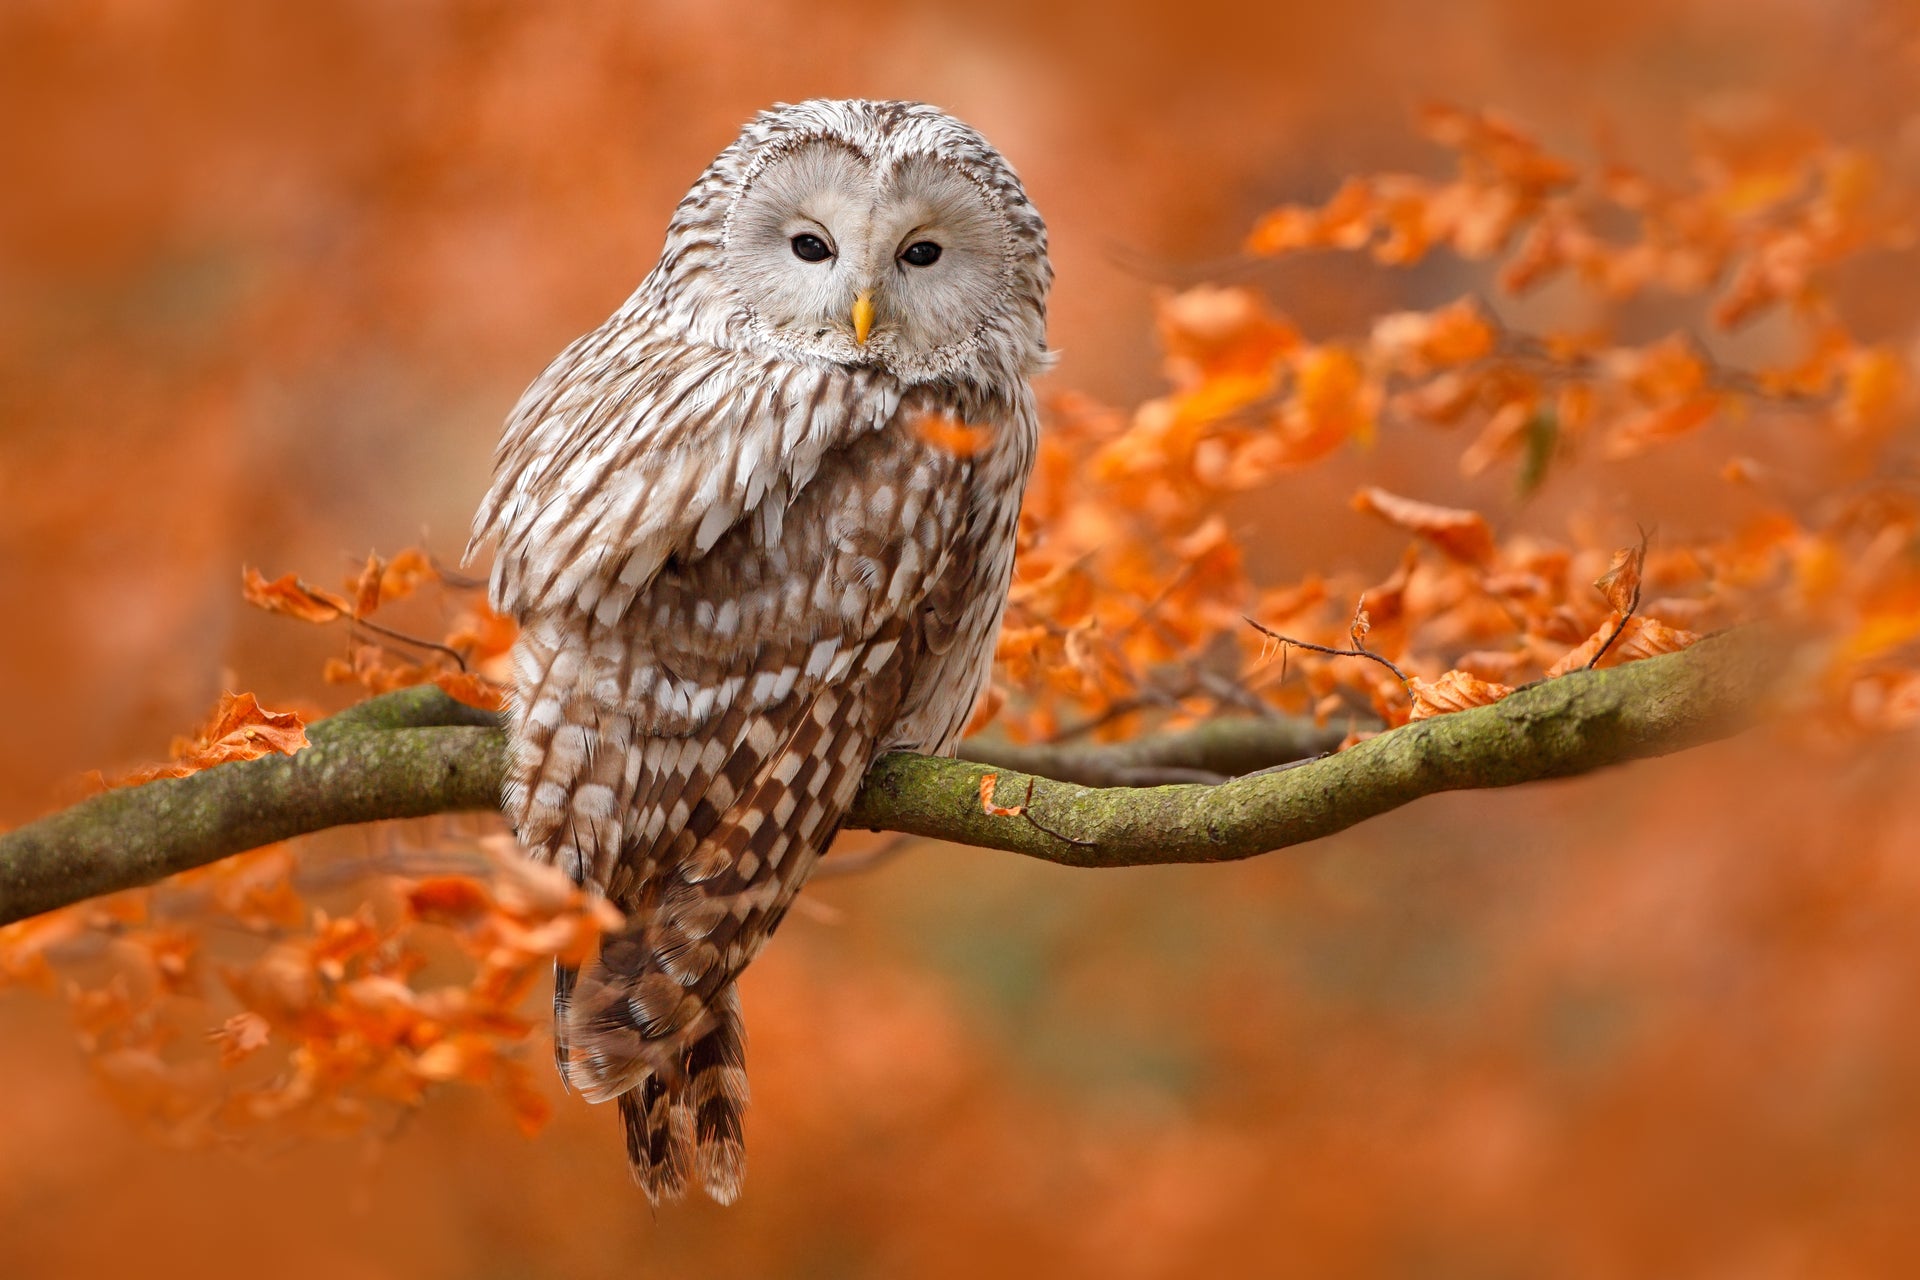 Owl in fall colors - Crosscountrycreations